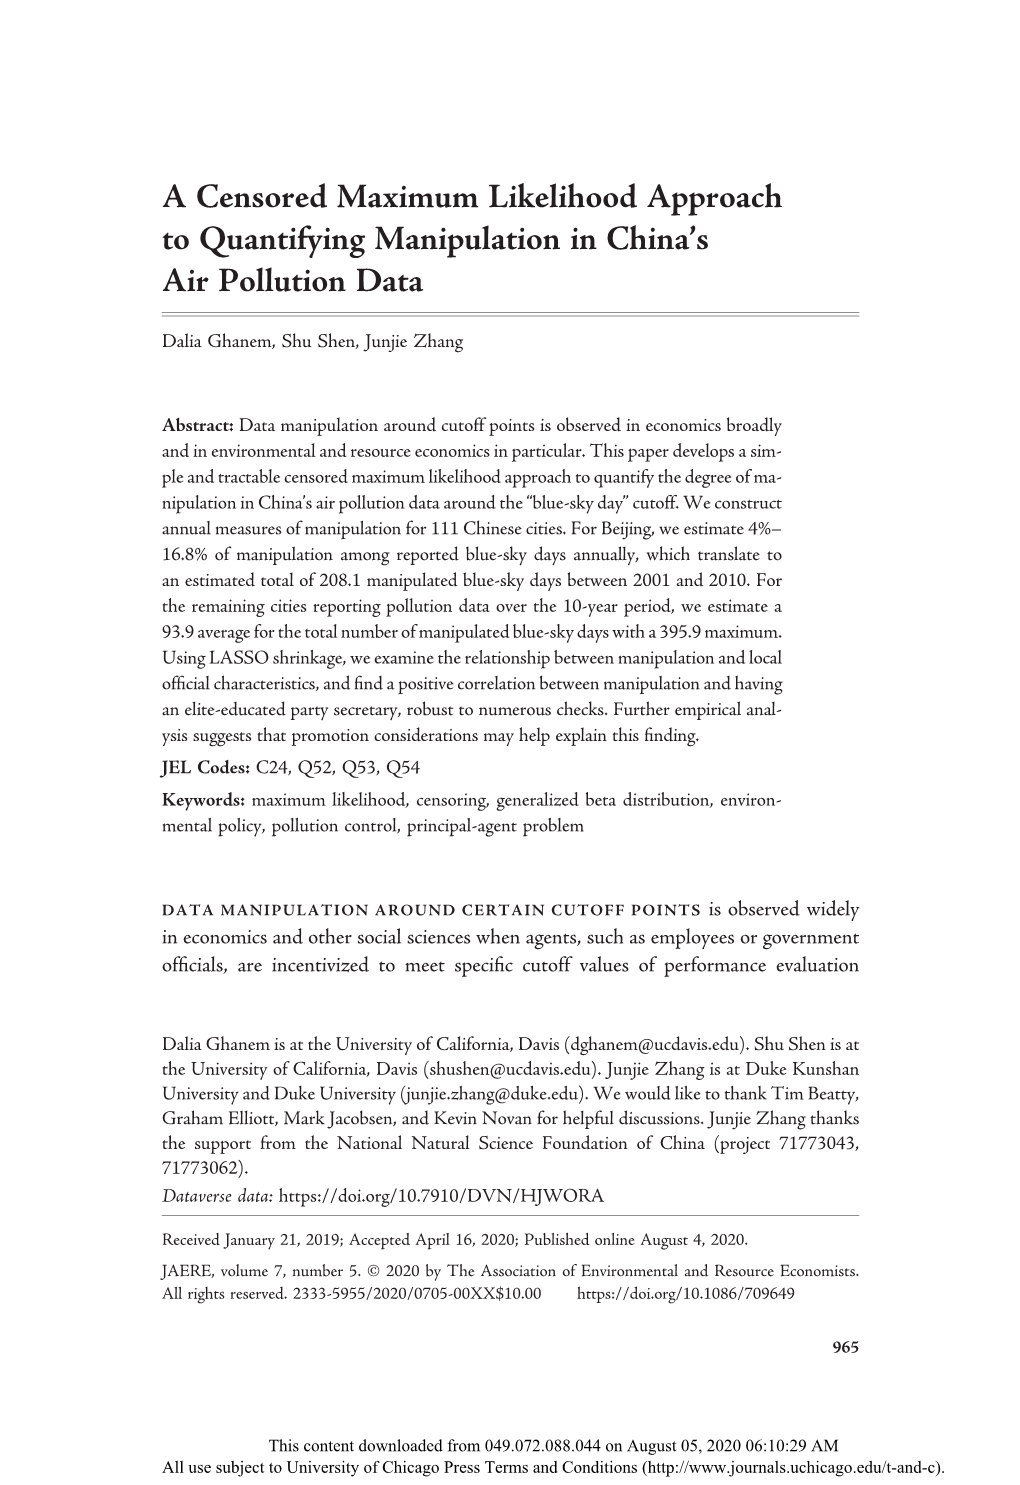 A Censored Maximum Likelihood Approach to Quantifying Manipulation in China’S Air Pollution Data